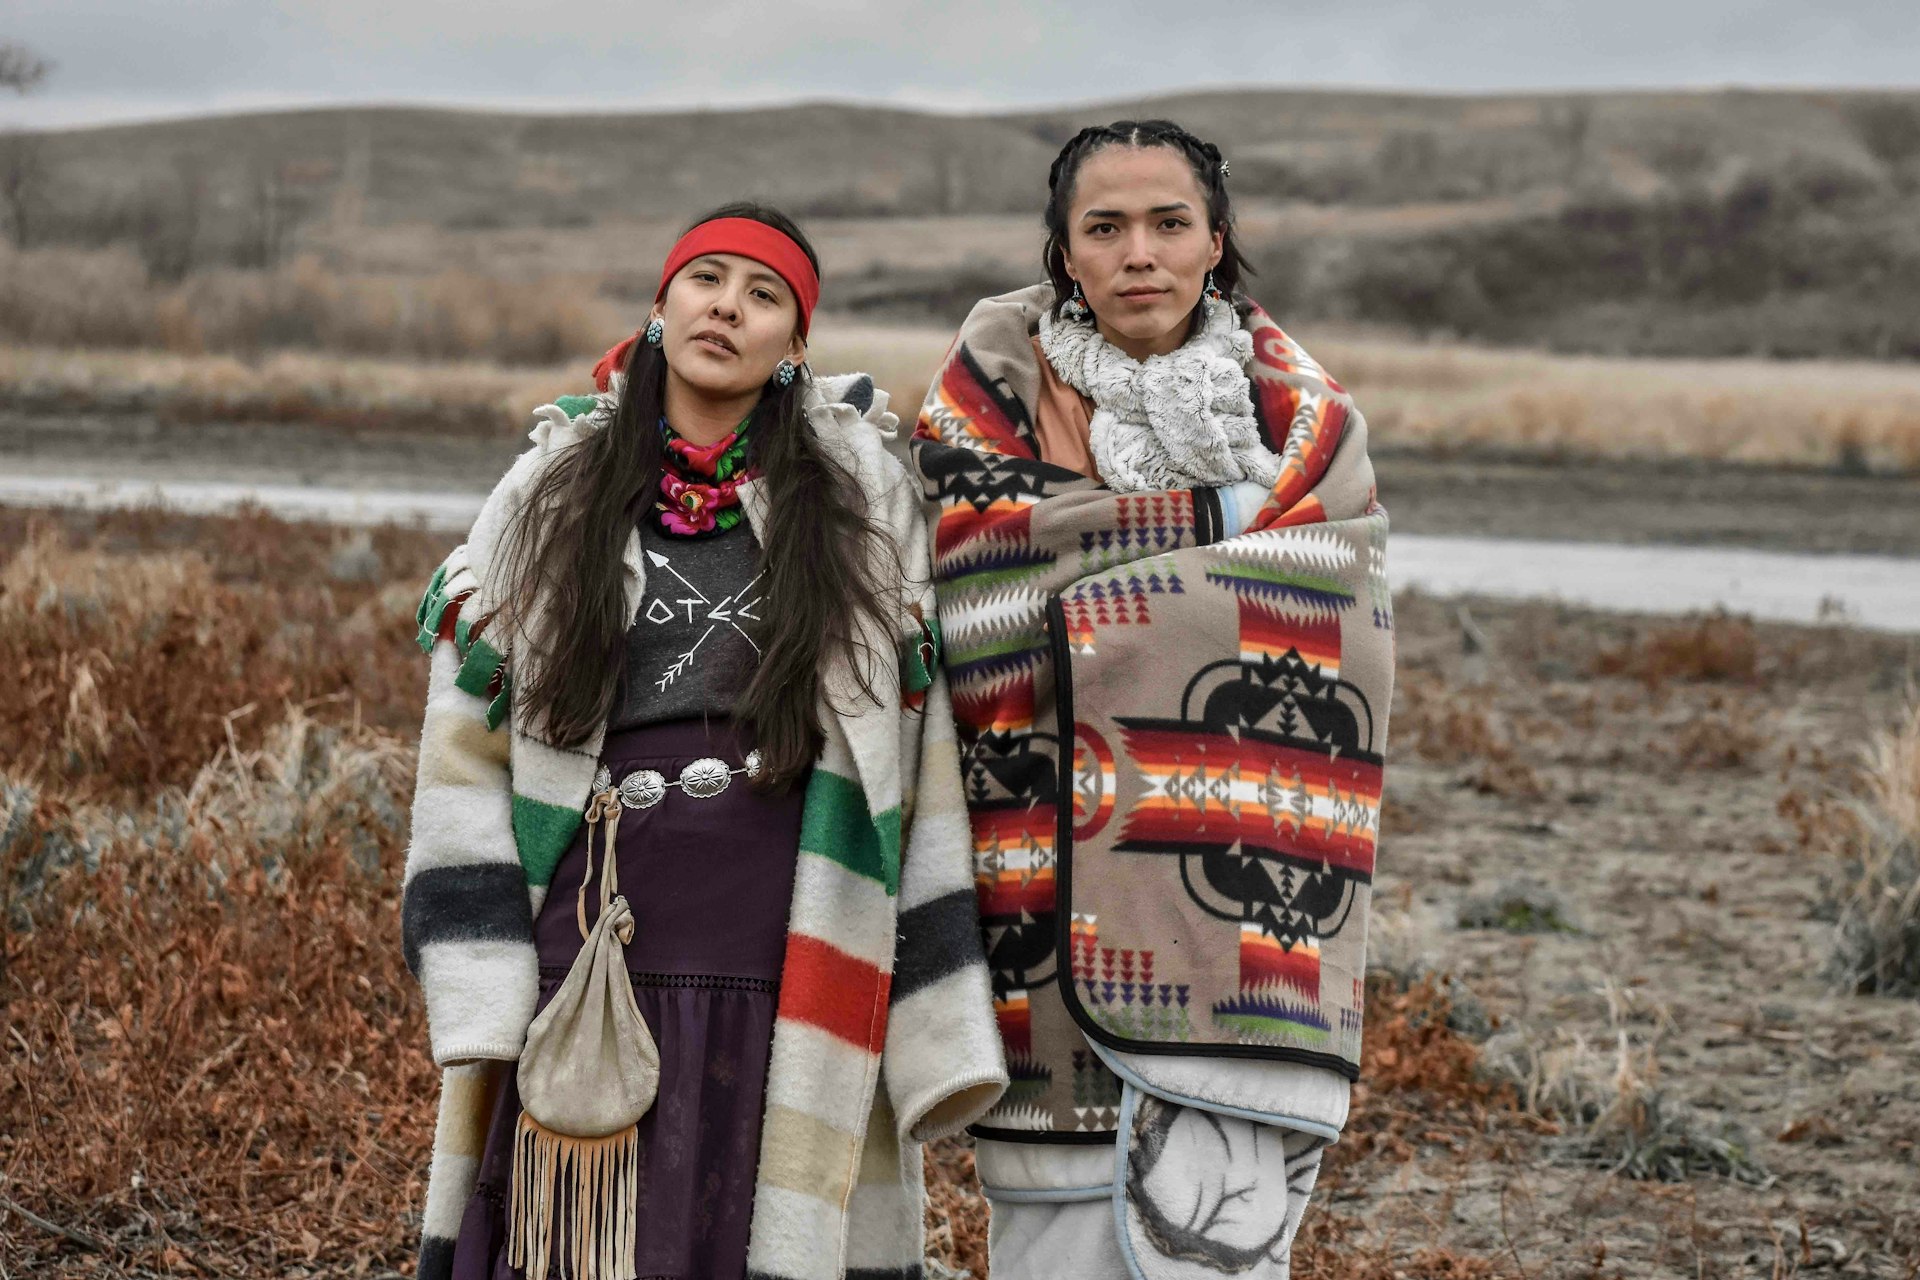 Two years on: a photographic tribute to Standing Rock